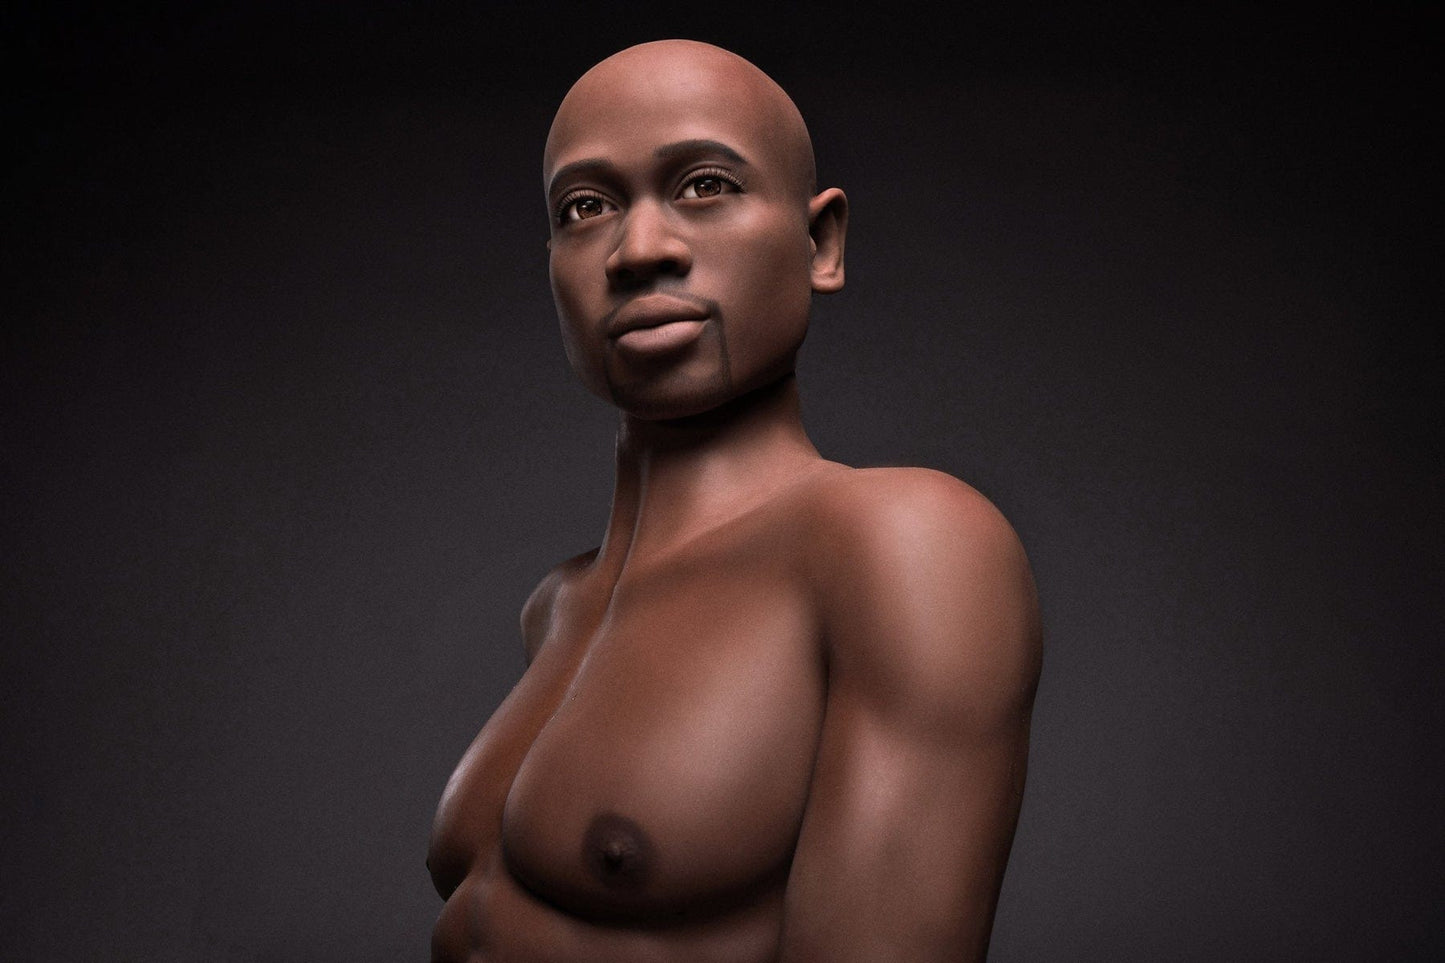 Doll Authority SEX DOLL 5'7" (175cm) - Male Body Luis James Realistic Male Sex Doll - Iron Tech Doll